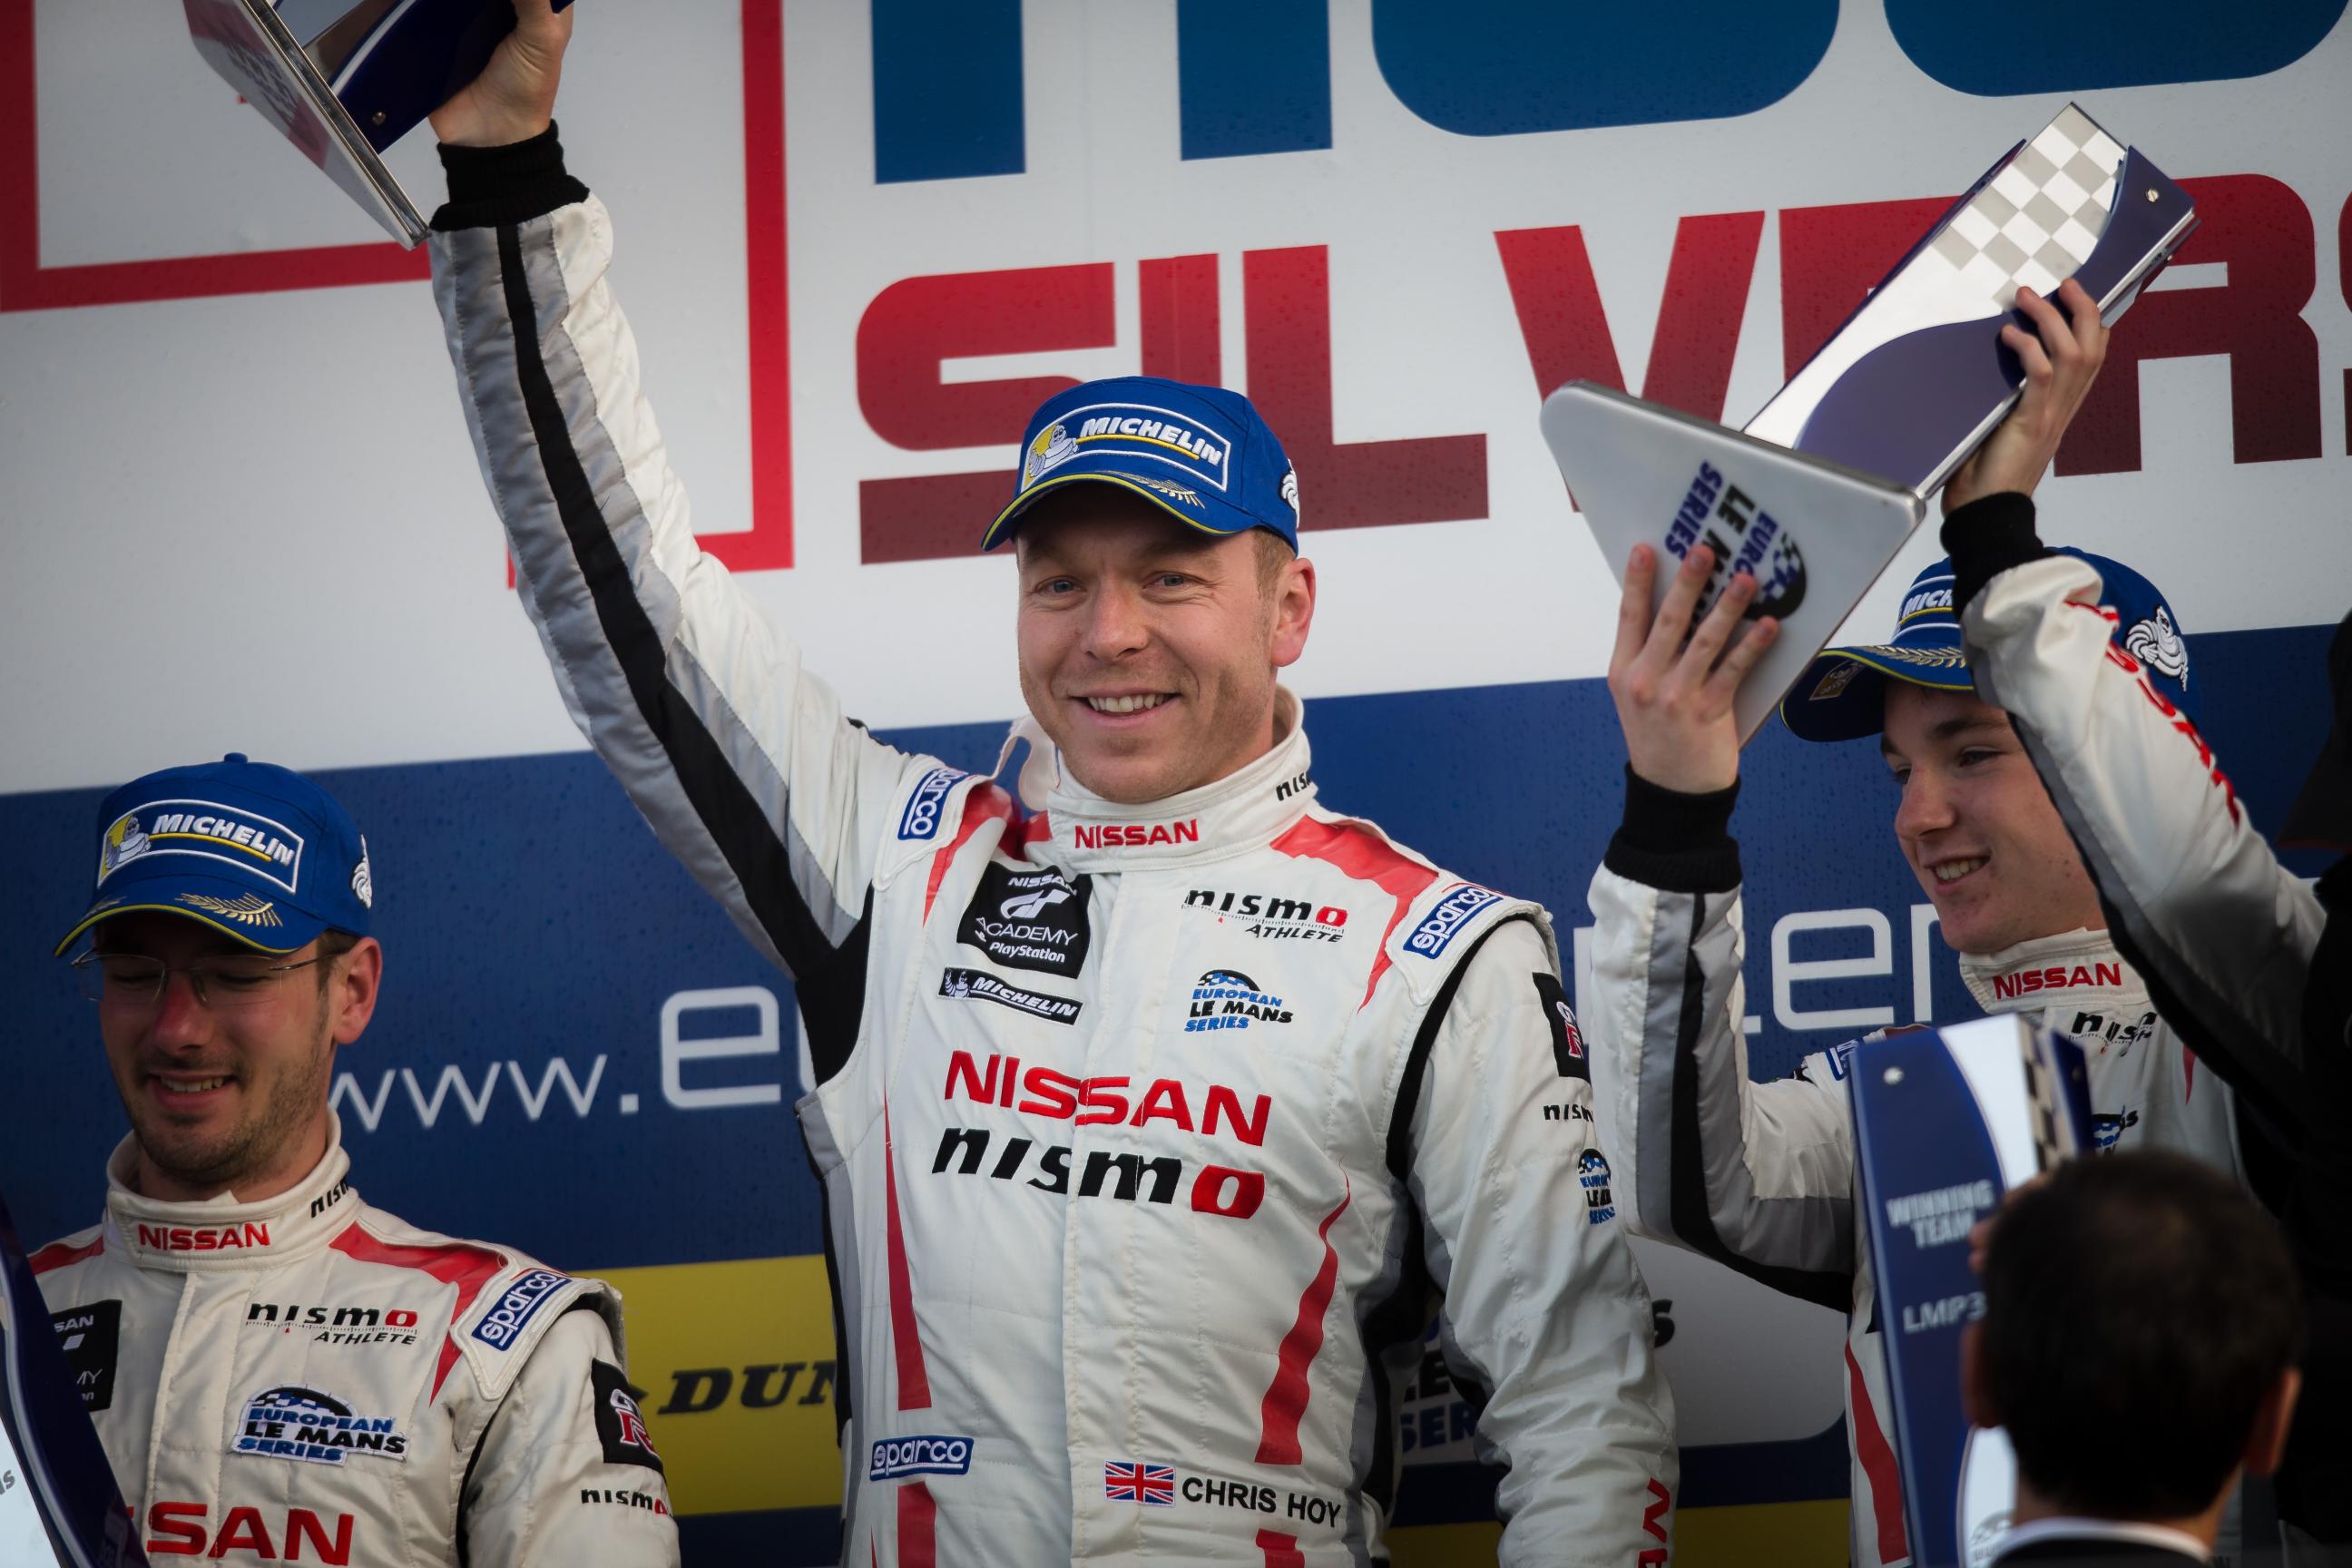 Sir Chris Hoy after his win at Silverstone in the 2015 European Le Mans Championship 